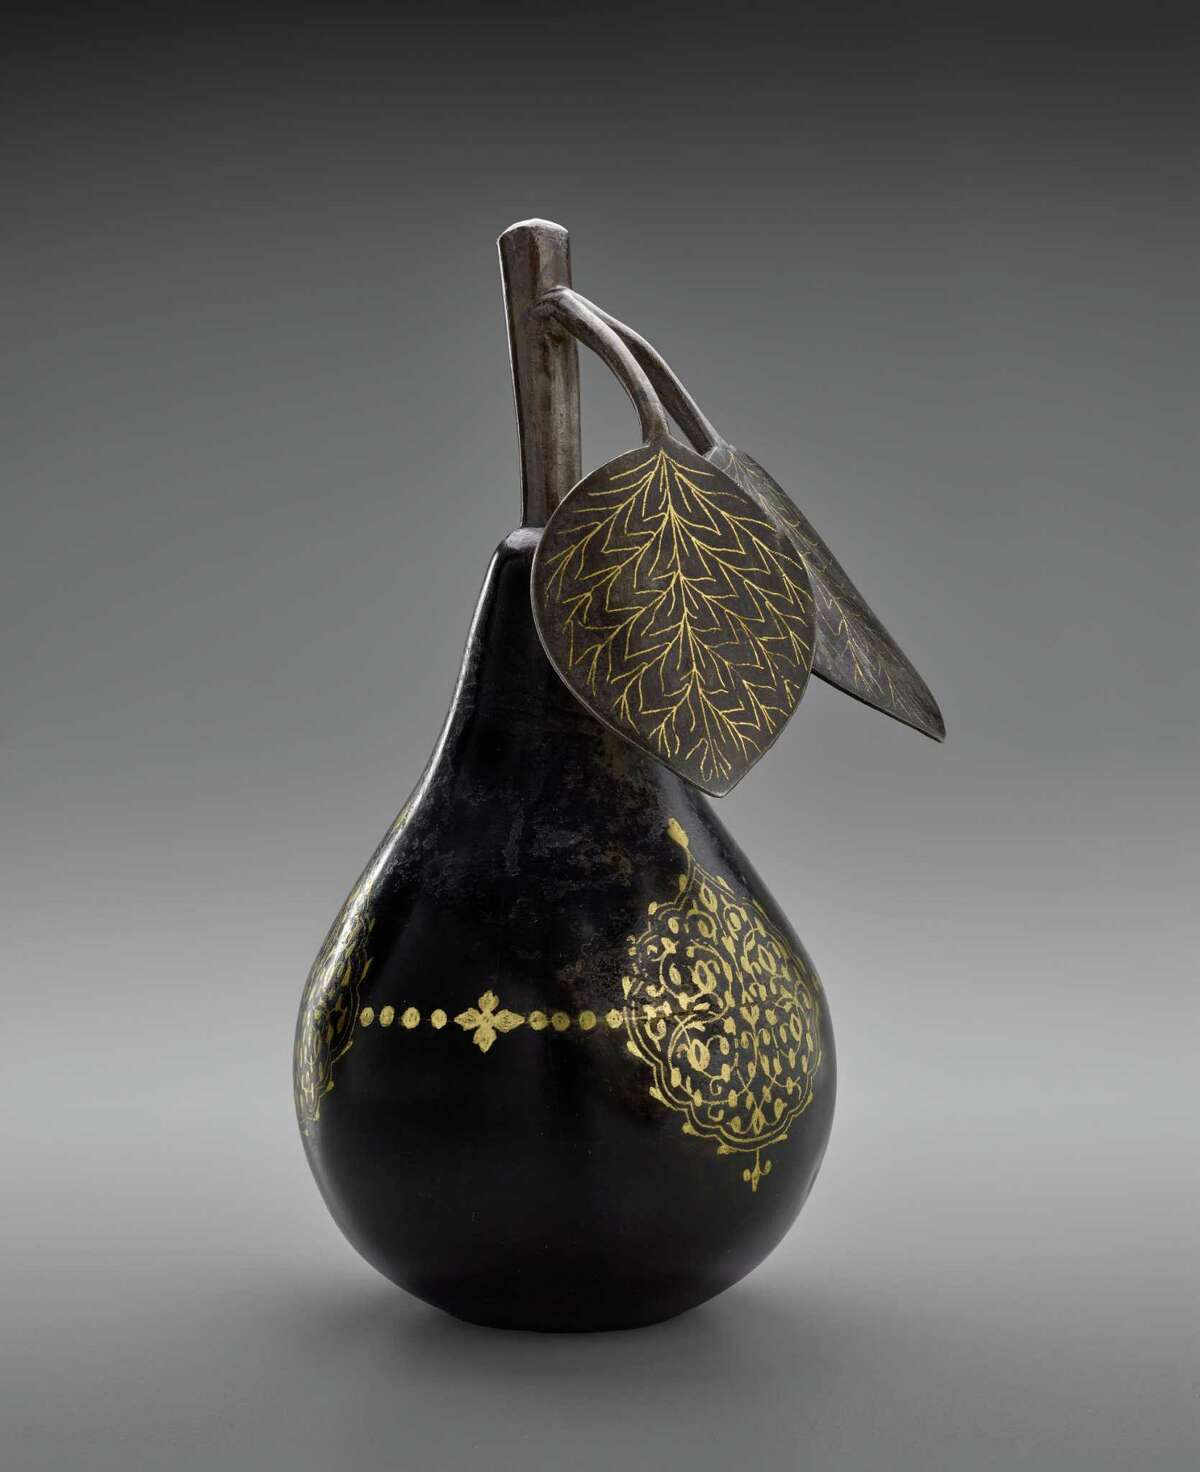 Among objects on view in "Bestowing Beauty: Masterpieces from Persian Lands":Â Pear, Iran, 19th century, steel, inlaid with gold.